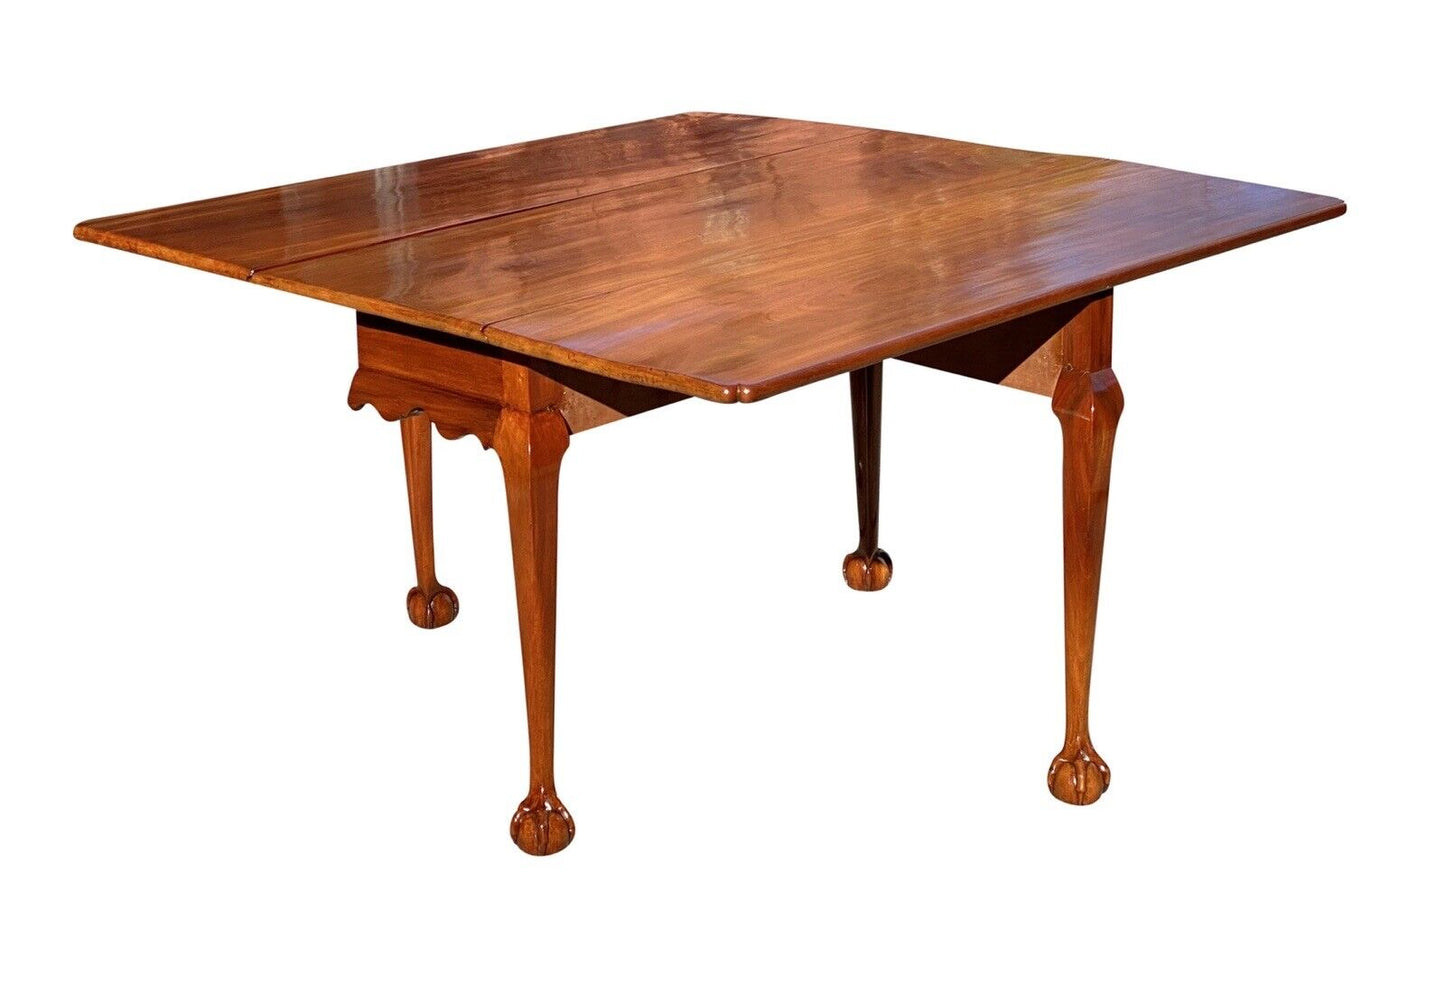 19th C Antique Centennial Chippendale Mahogany Drop Leaf Dining Table